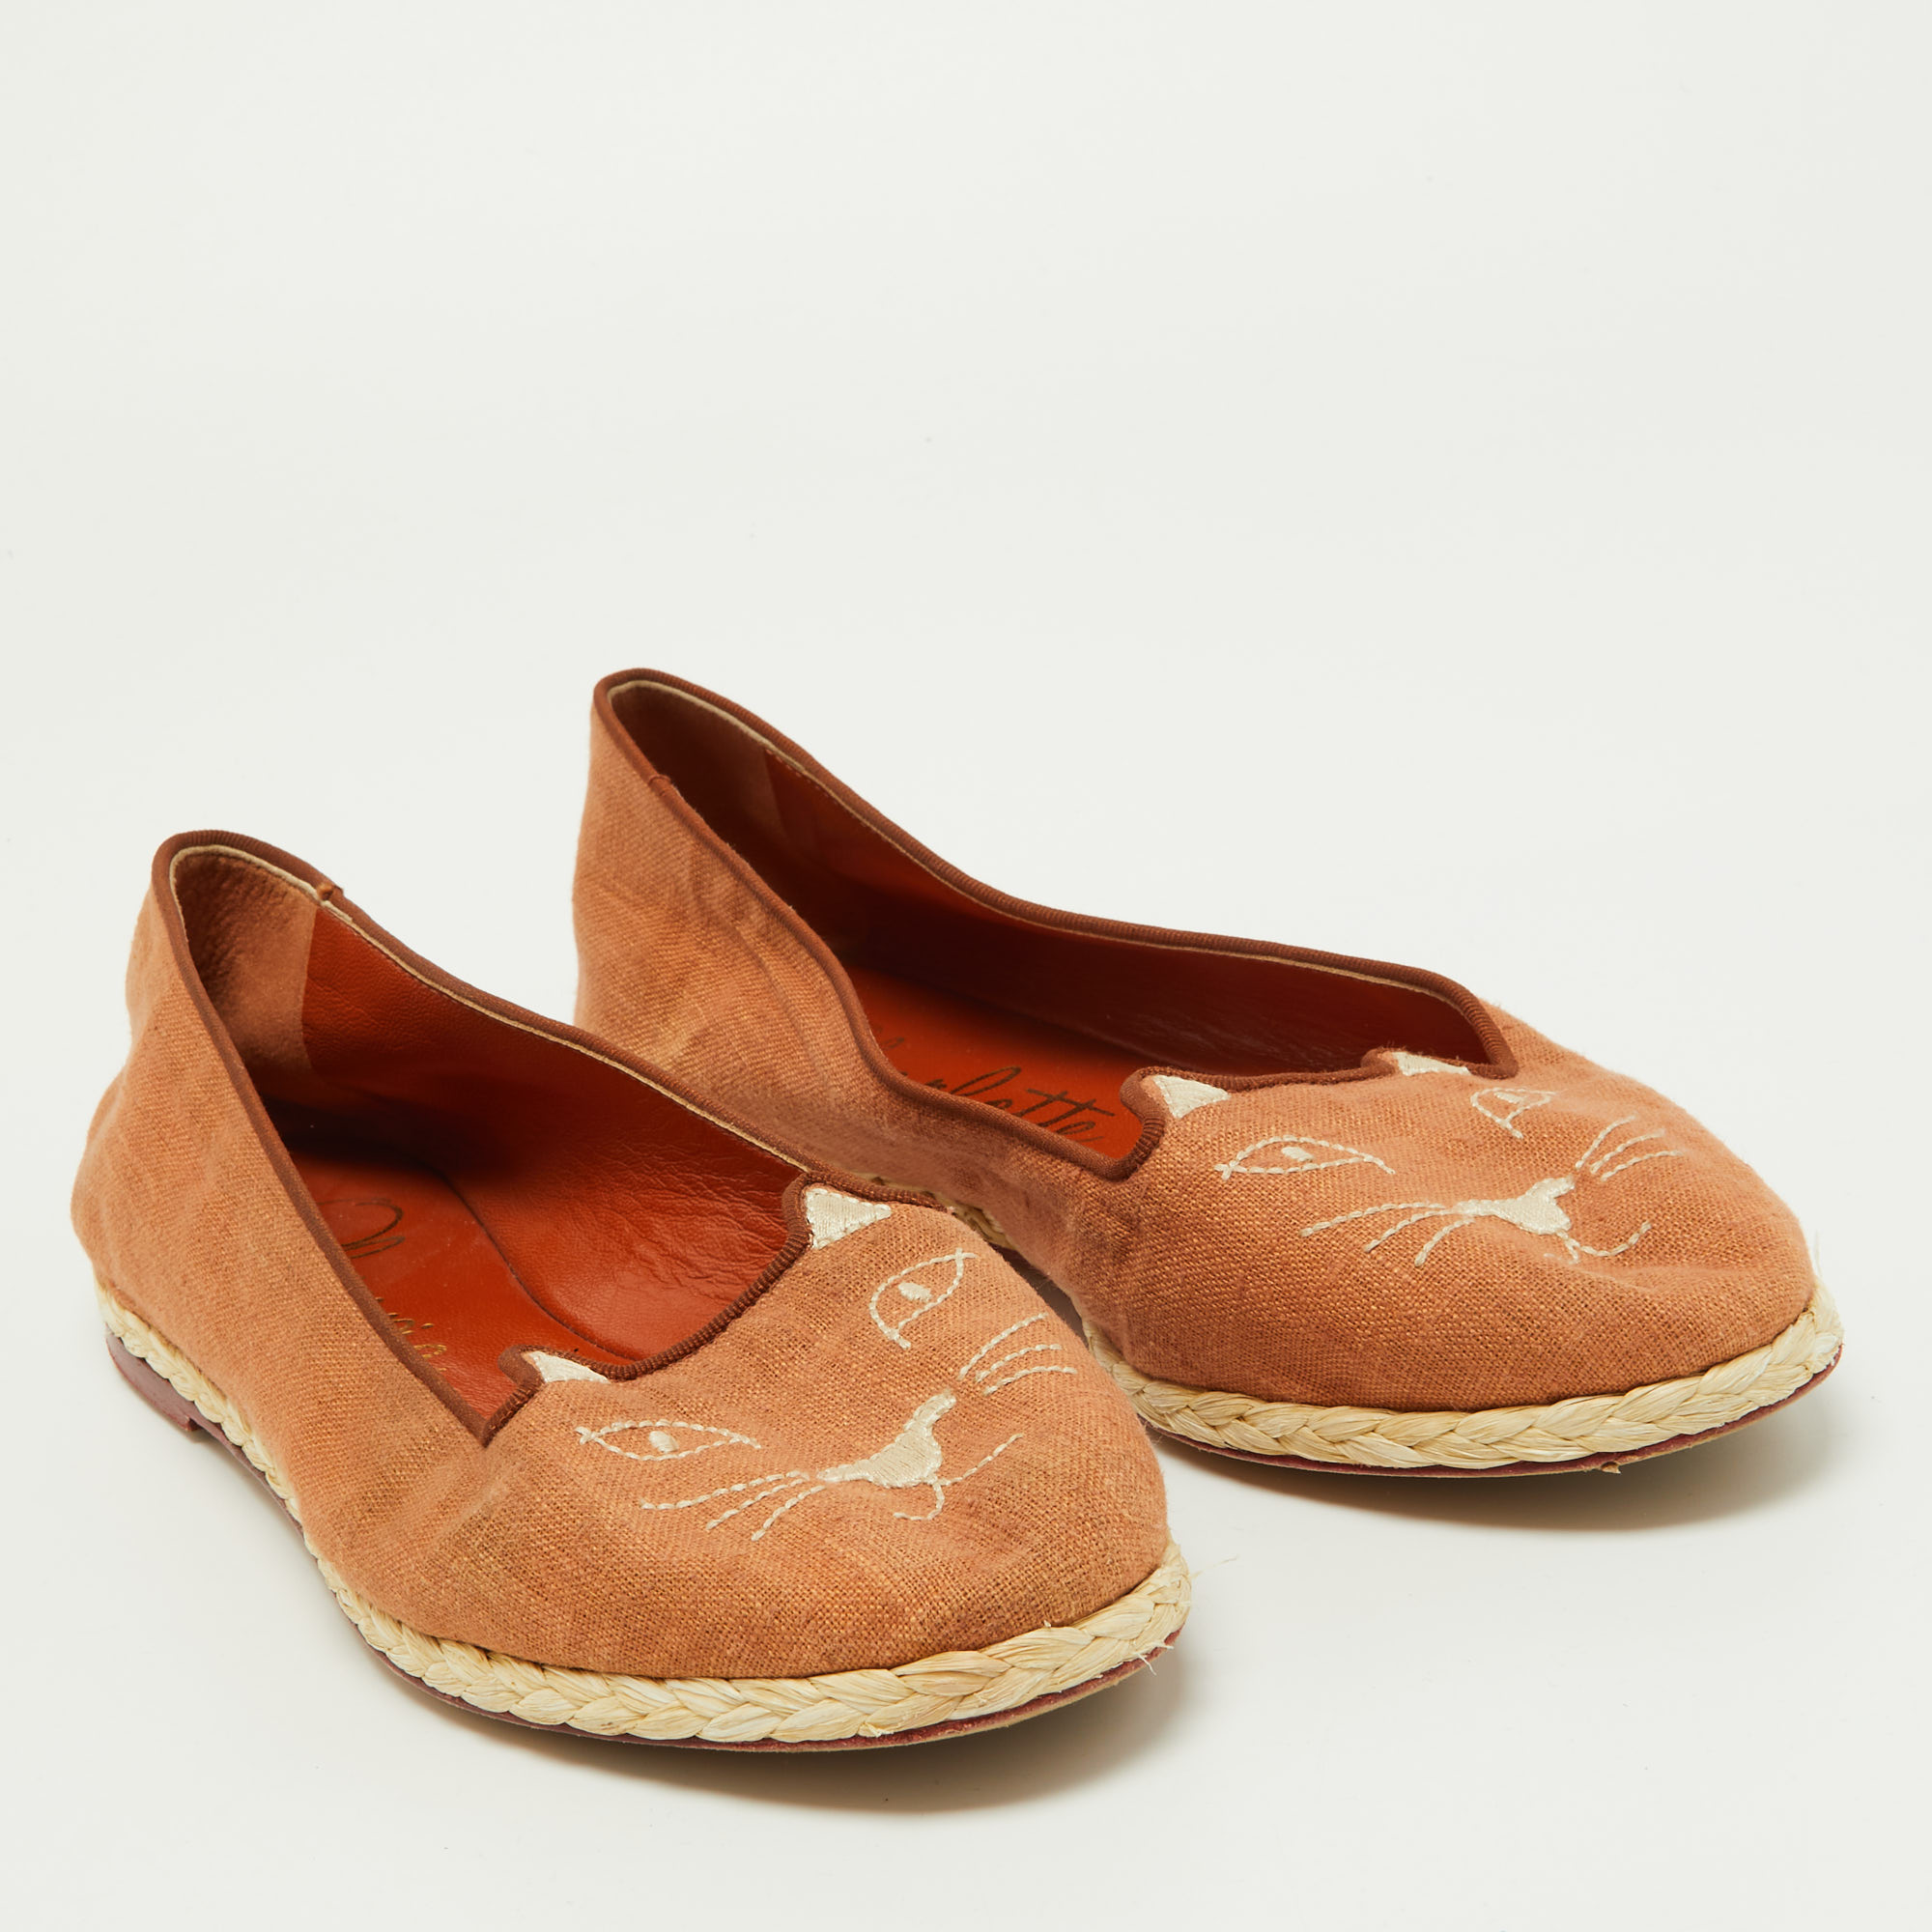 Charlotte Olympia Brown Canvas Espadrilles Flats Size 37